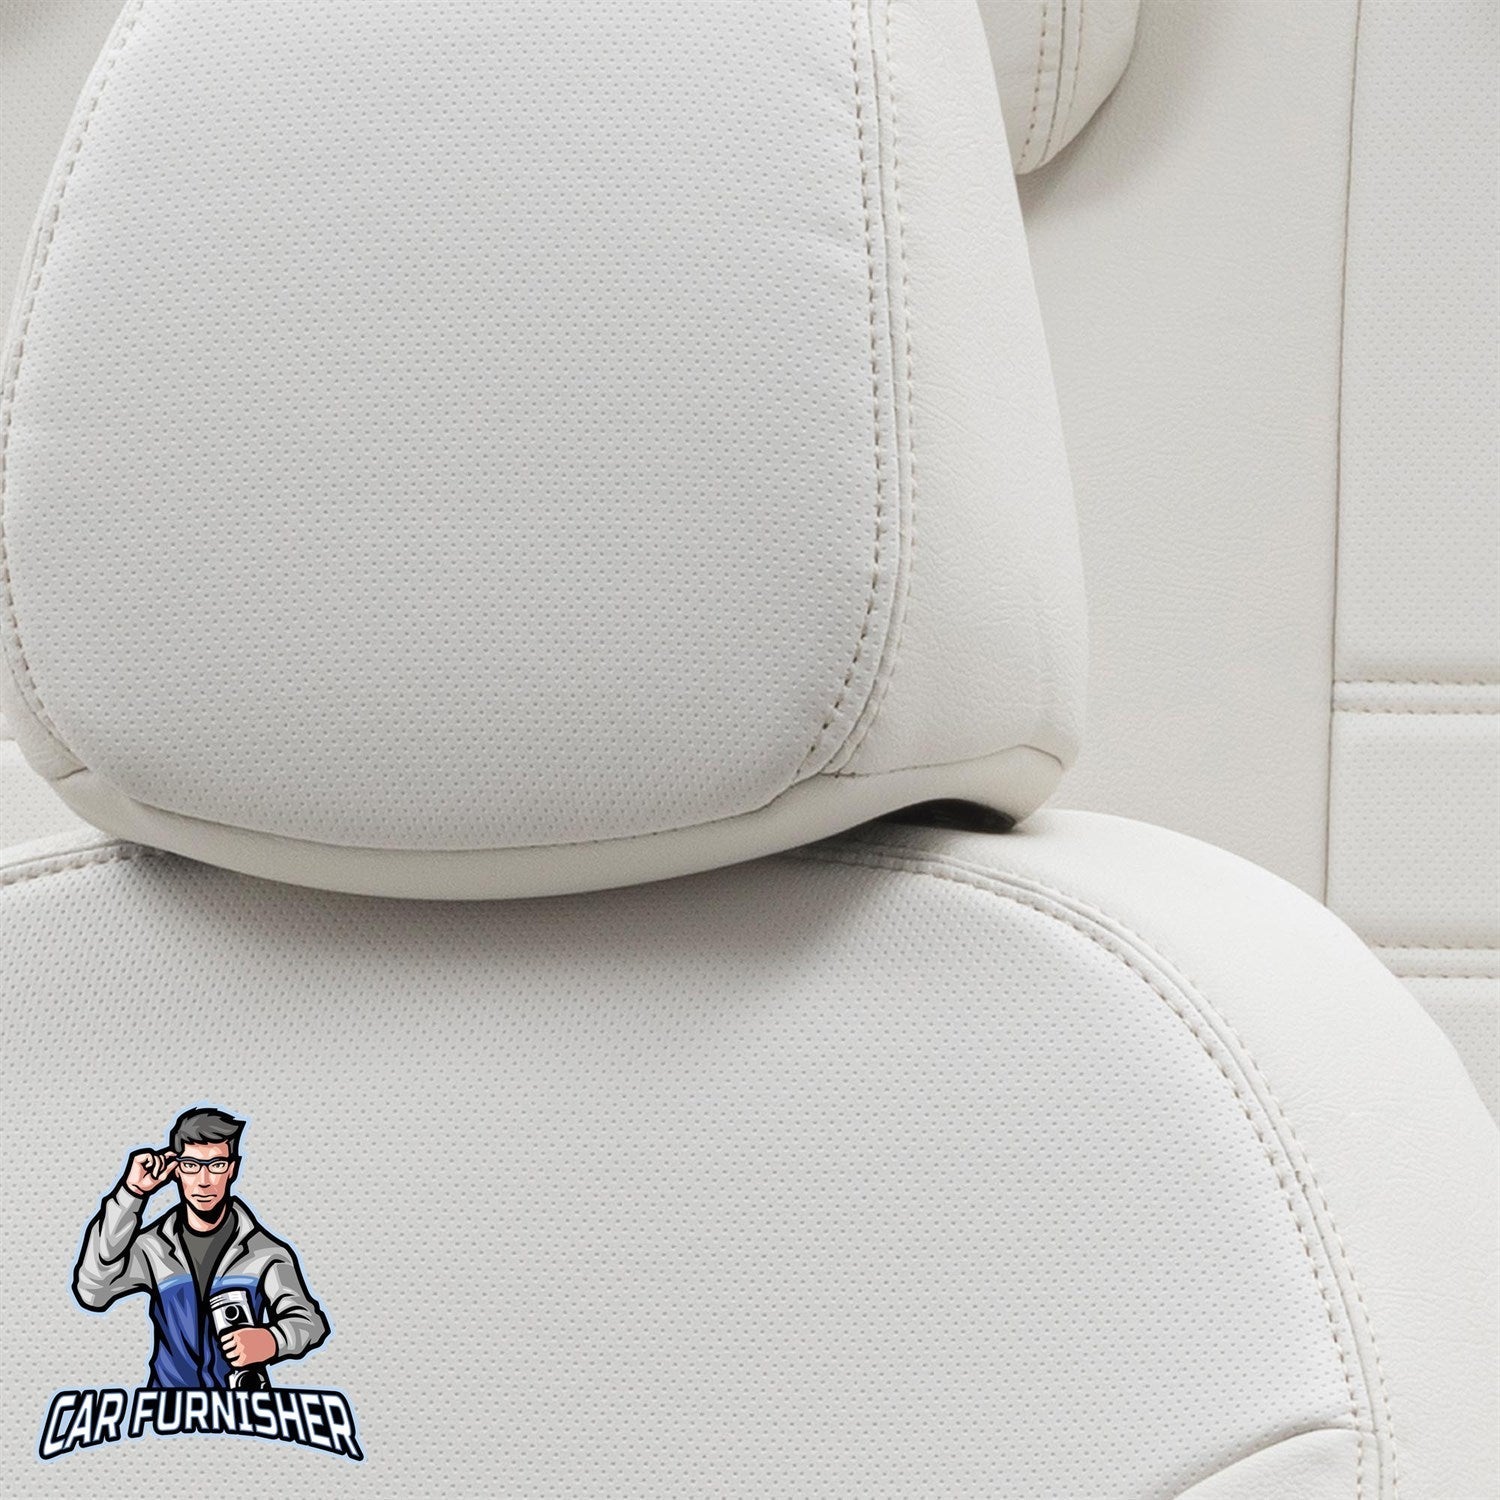 Citroen Jumpy Seat Covers Istanbul Leather Design Ivory Leather